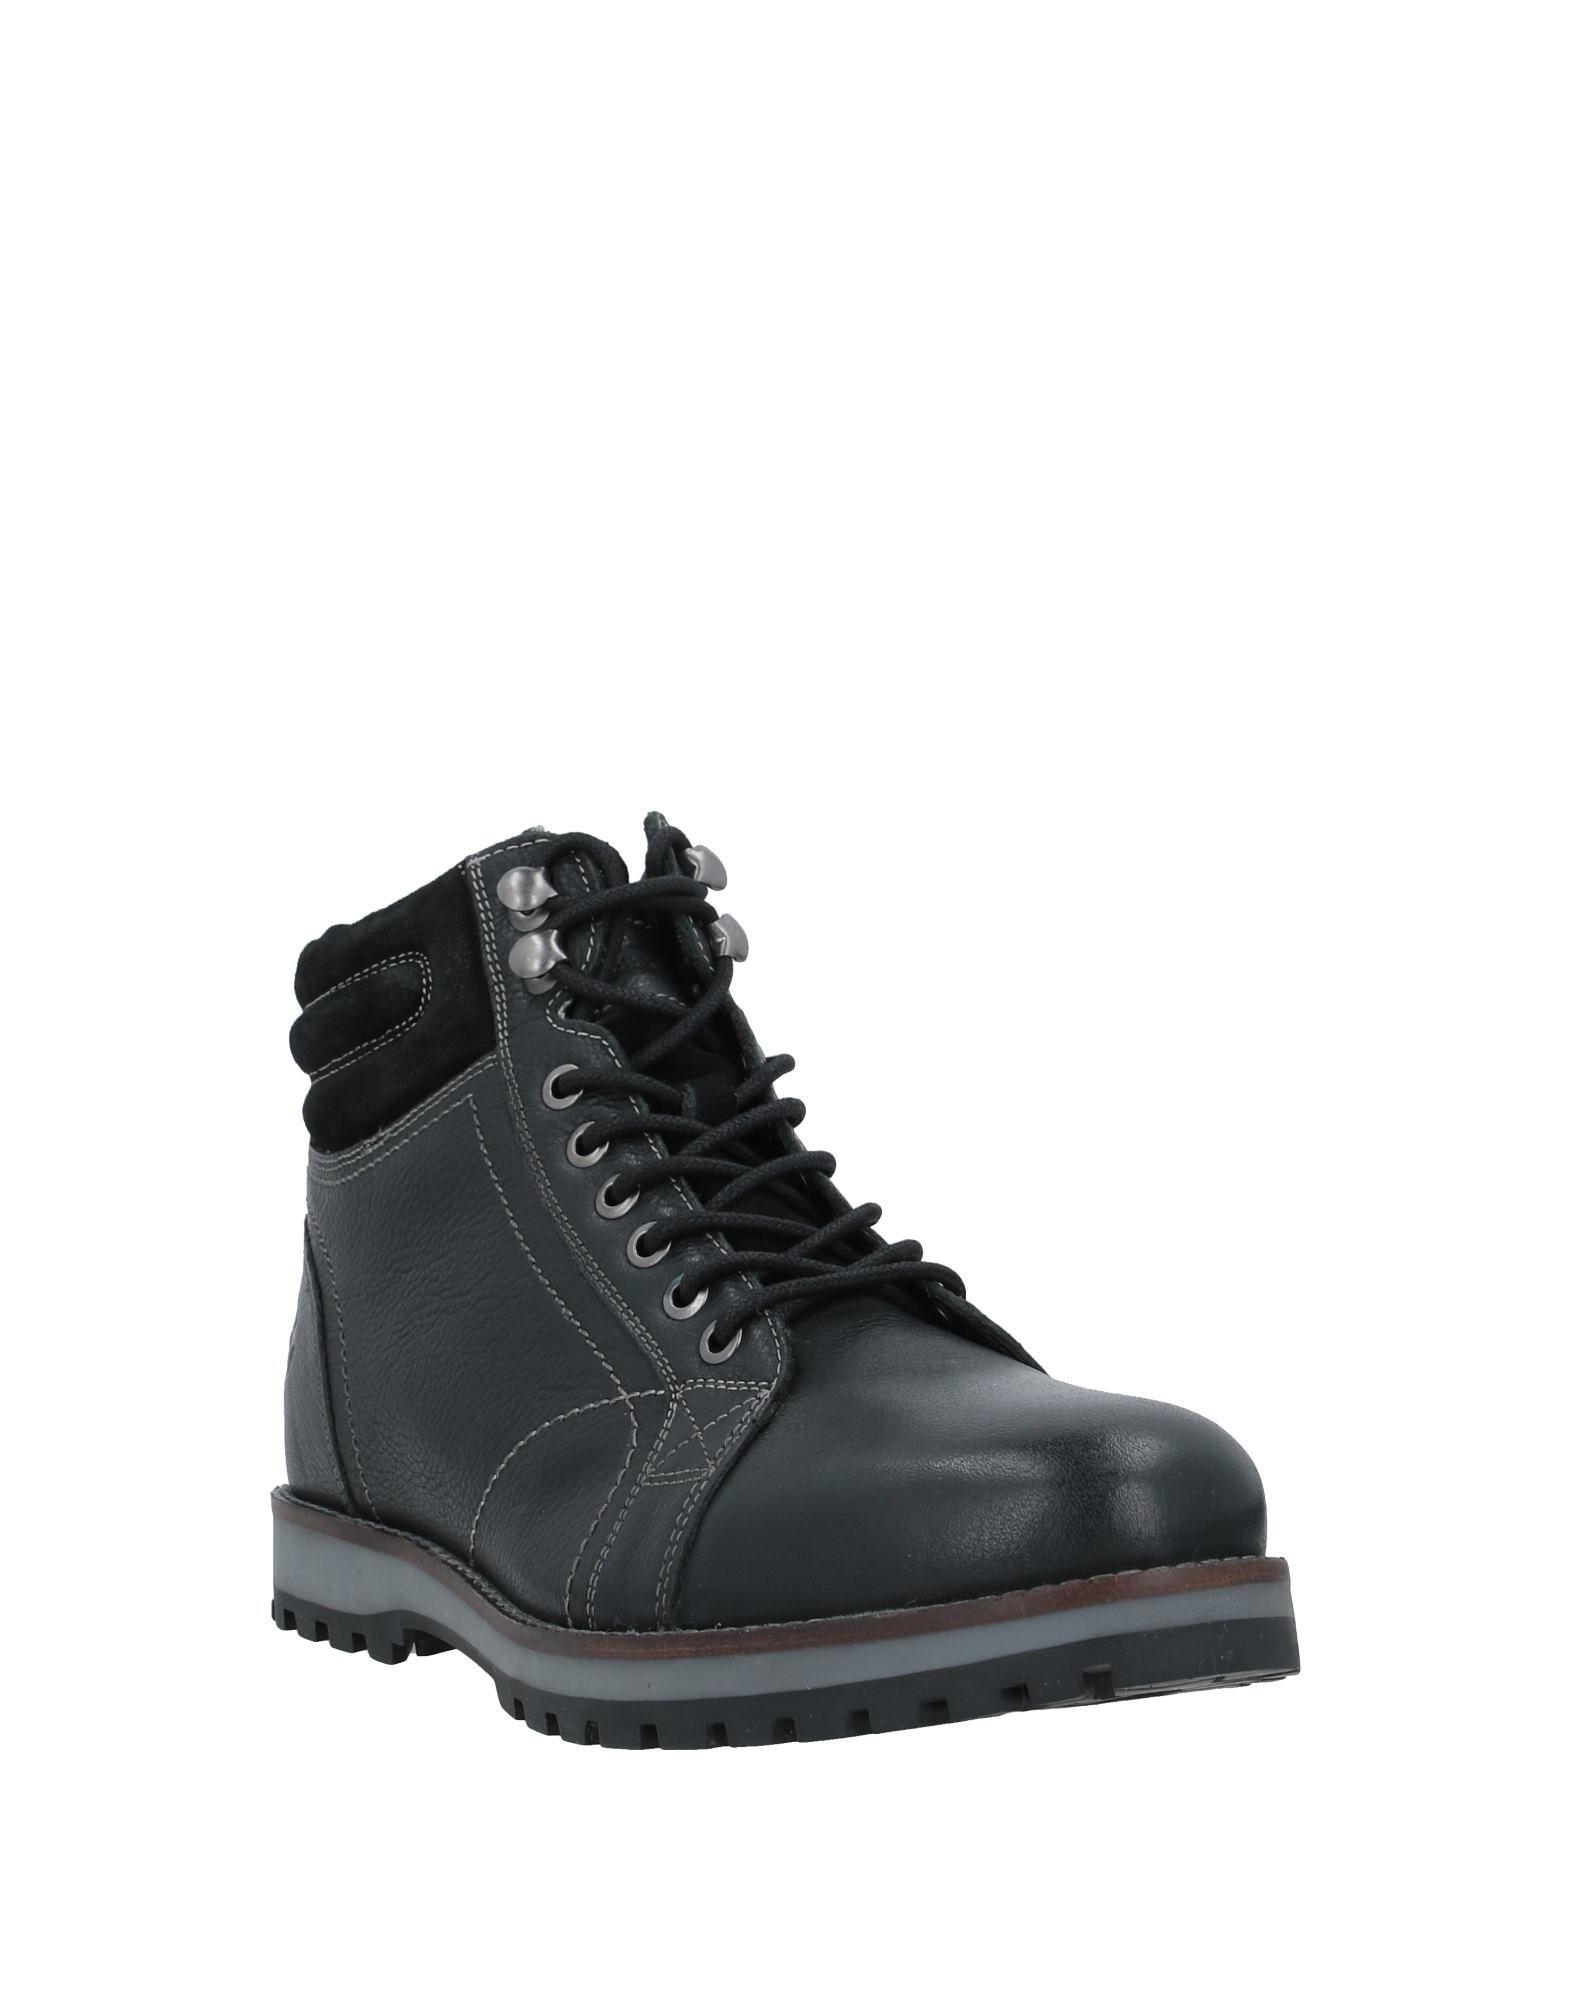 Lumberjack Suede Ankle Boots in Black for Men - Lyst